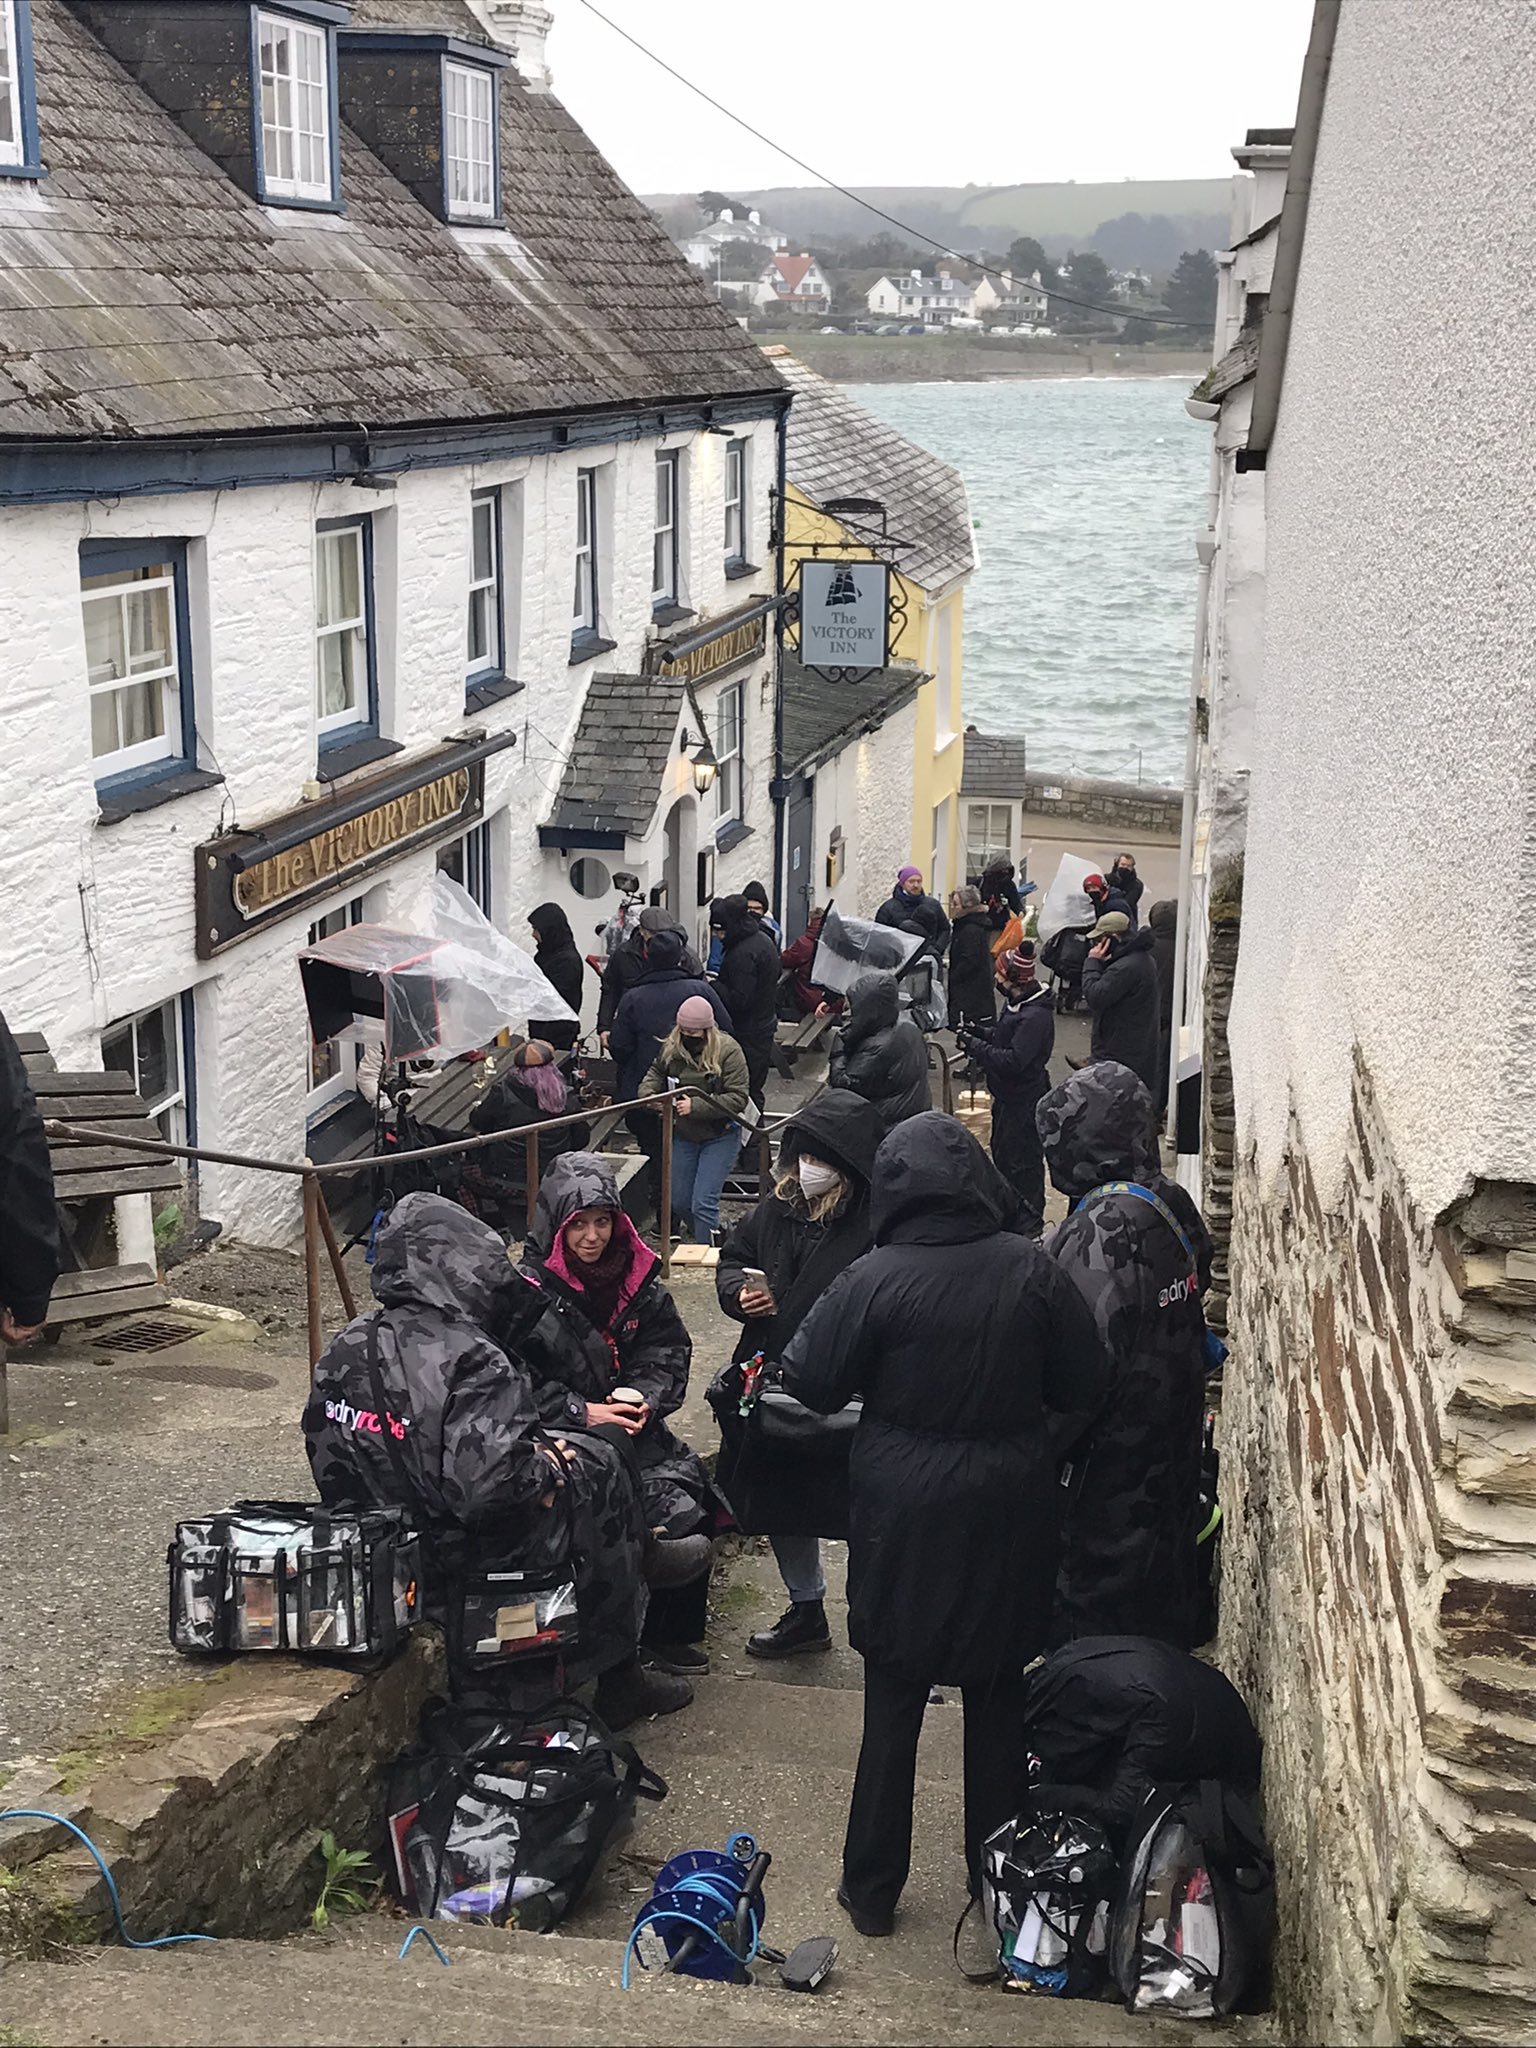 Filming yesterday in St Mawes. Pictures courtesy of StrikeFans.com